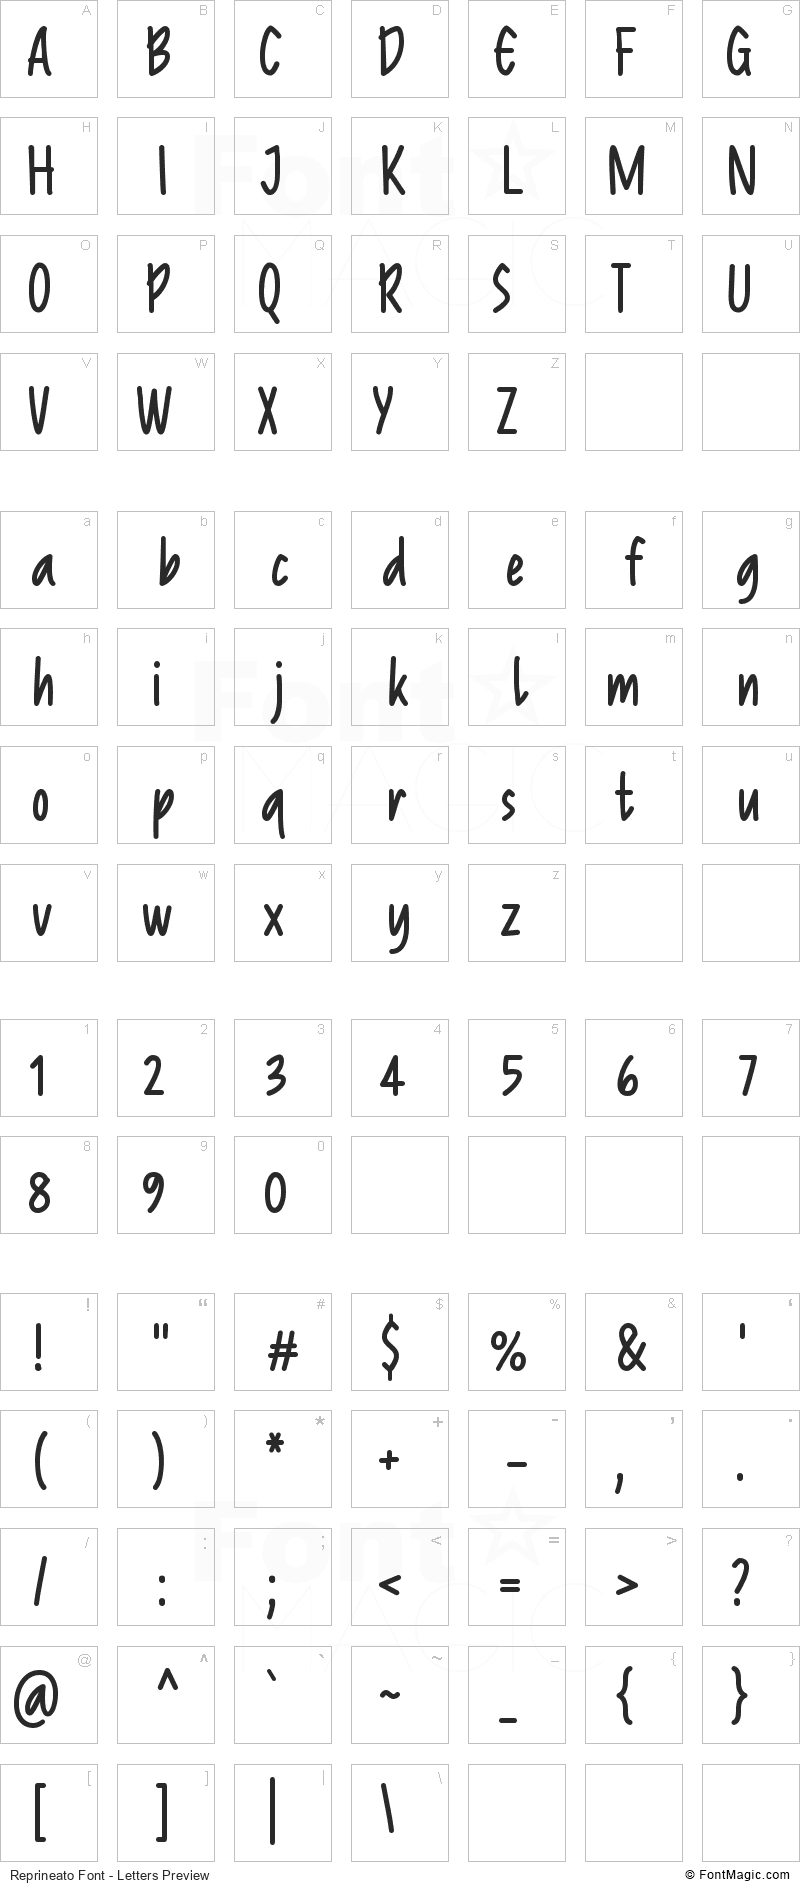 Reprineato Font - All Latters Preview Chart